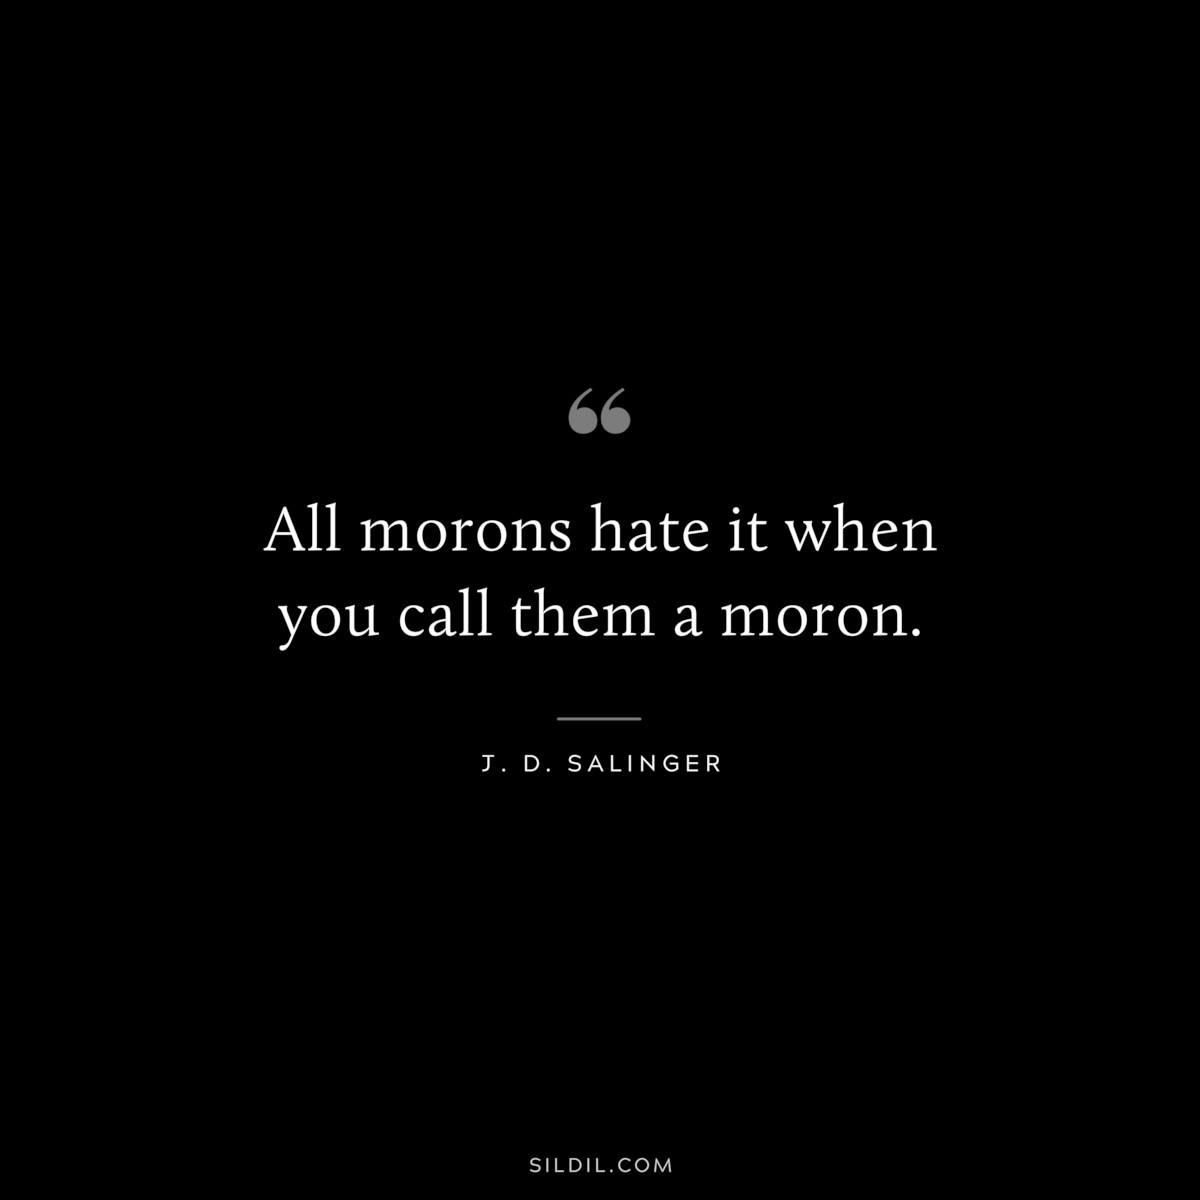 All morons hate it when you call them a moron. — J. D. Salinger